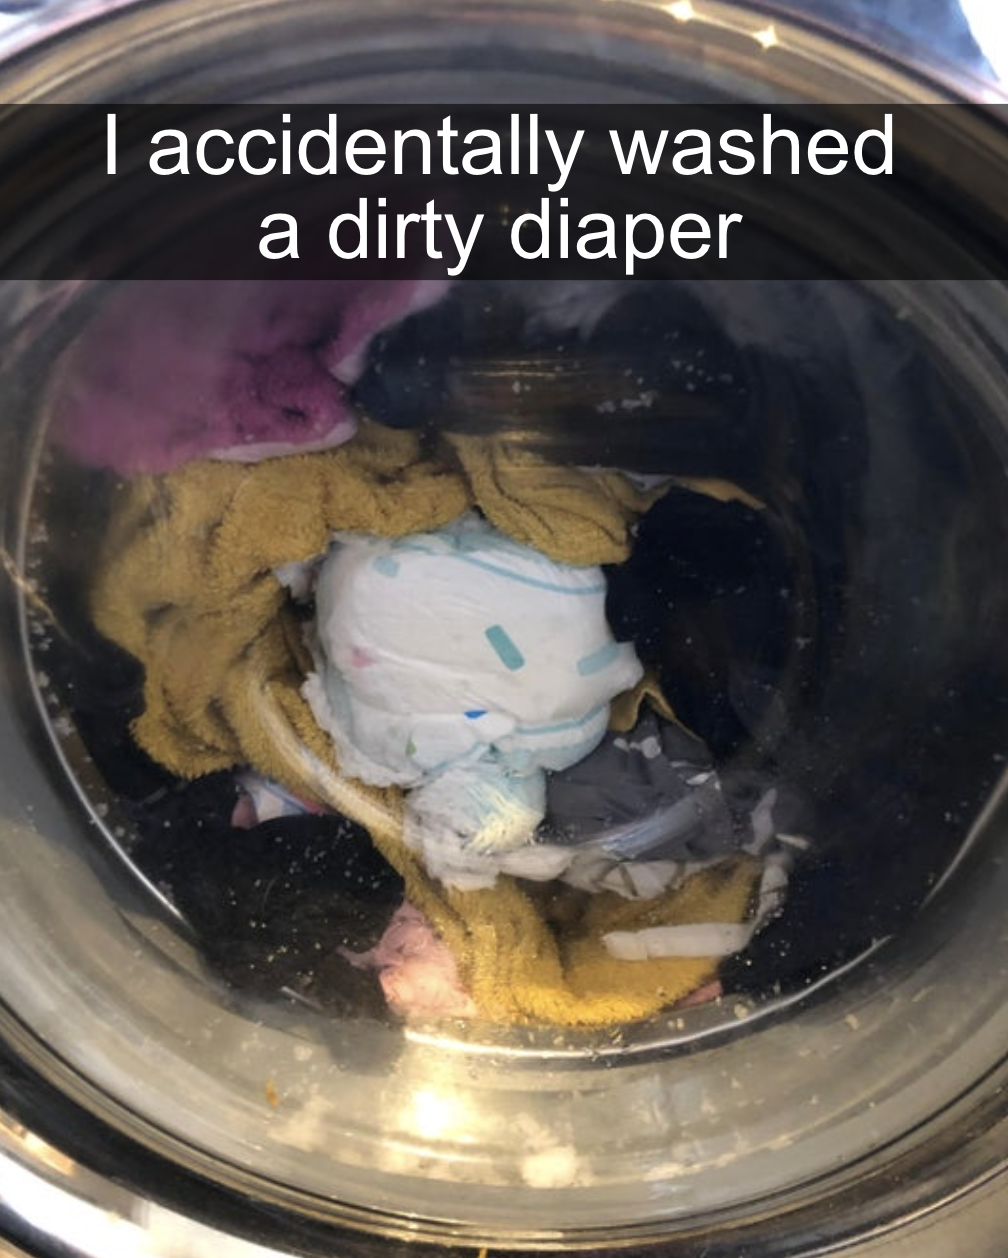 person who washed a dirty diaper